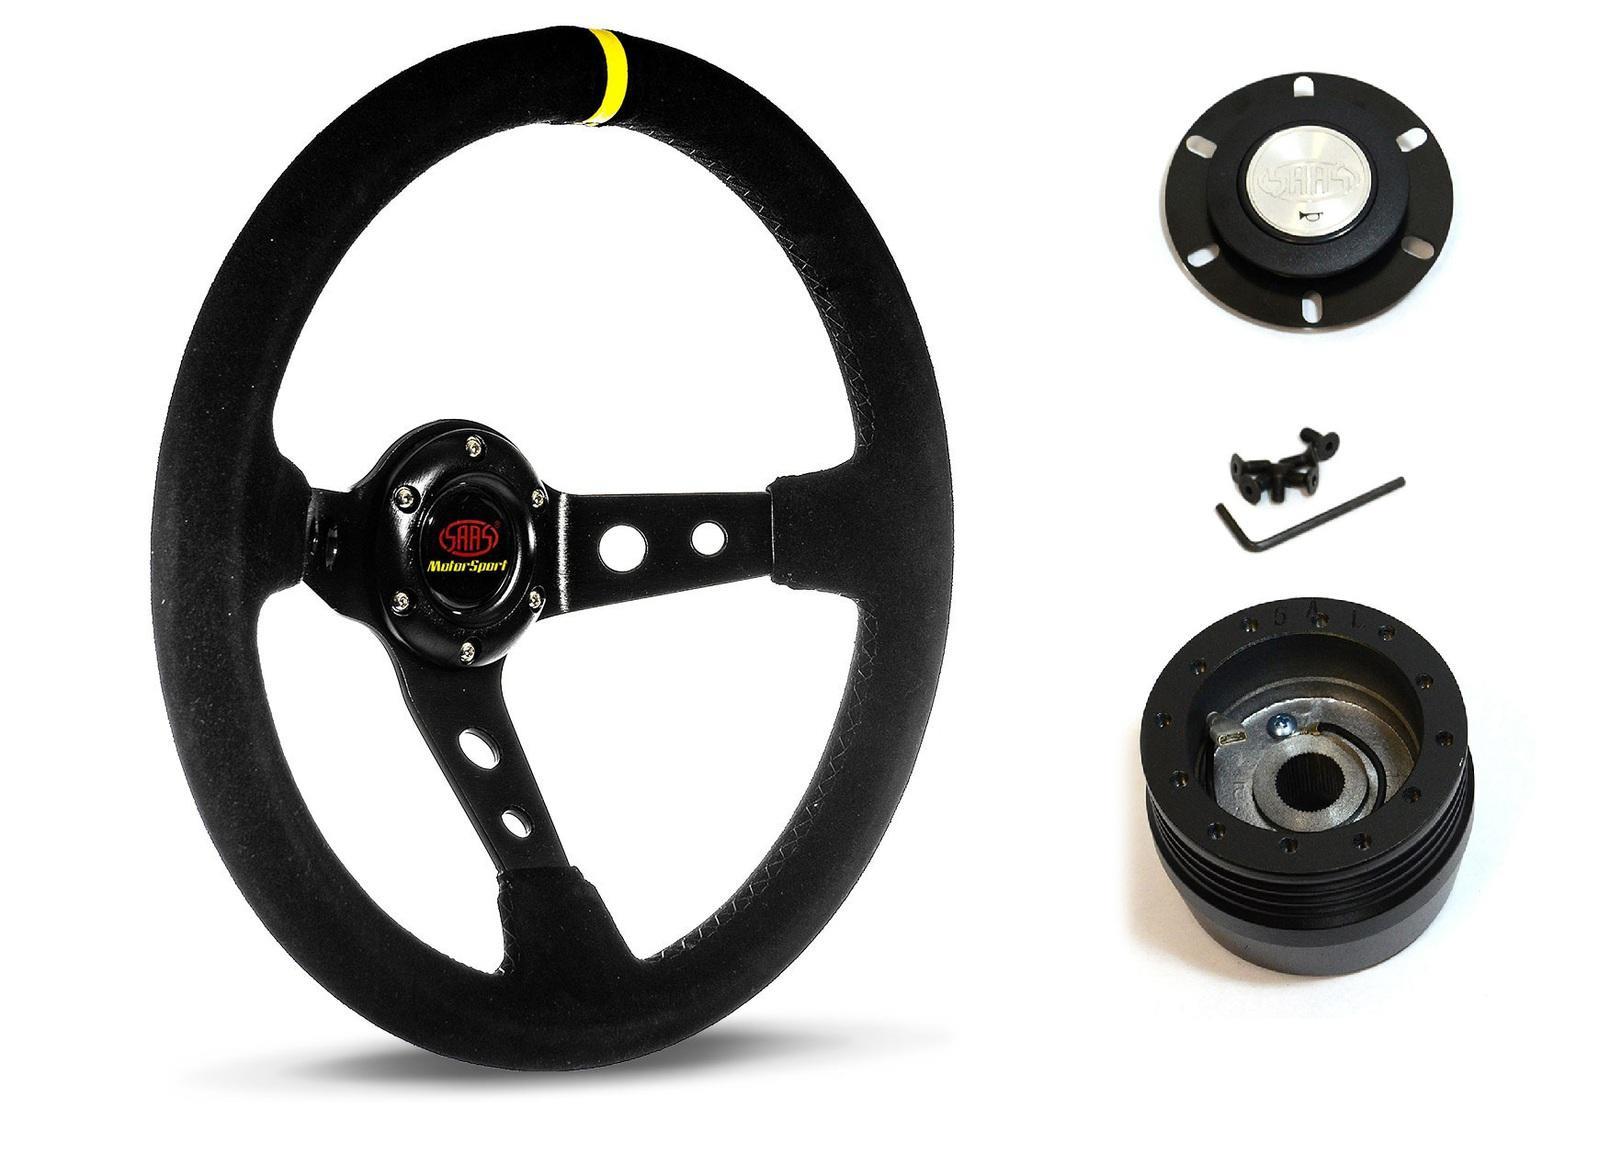 SAAS Steering Wheel Suede 14" ADR GT Deep Dish Black With Holes + Indicator SWGT1 and SAAS boss kit for Ford Corsair All Models 1988-1996